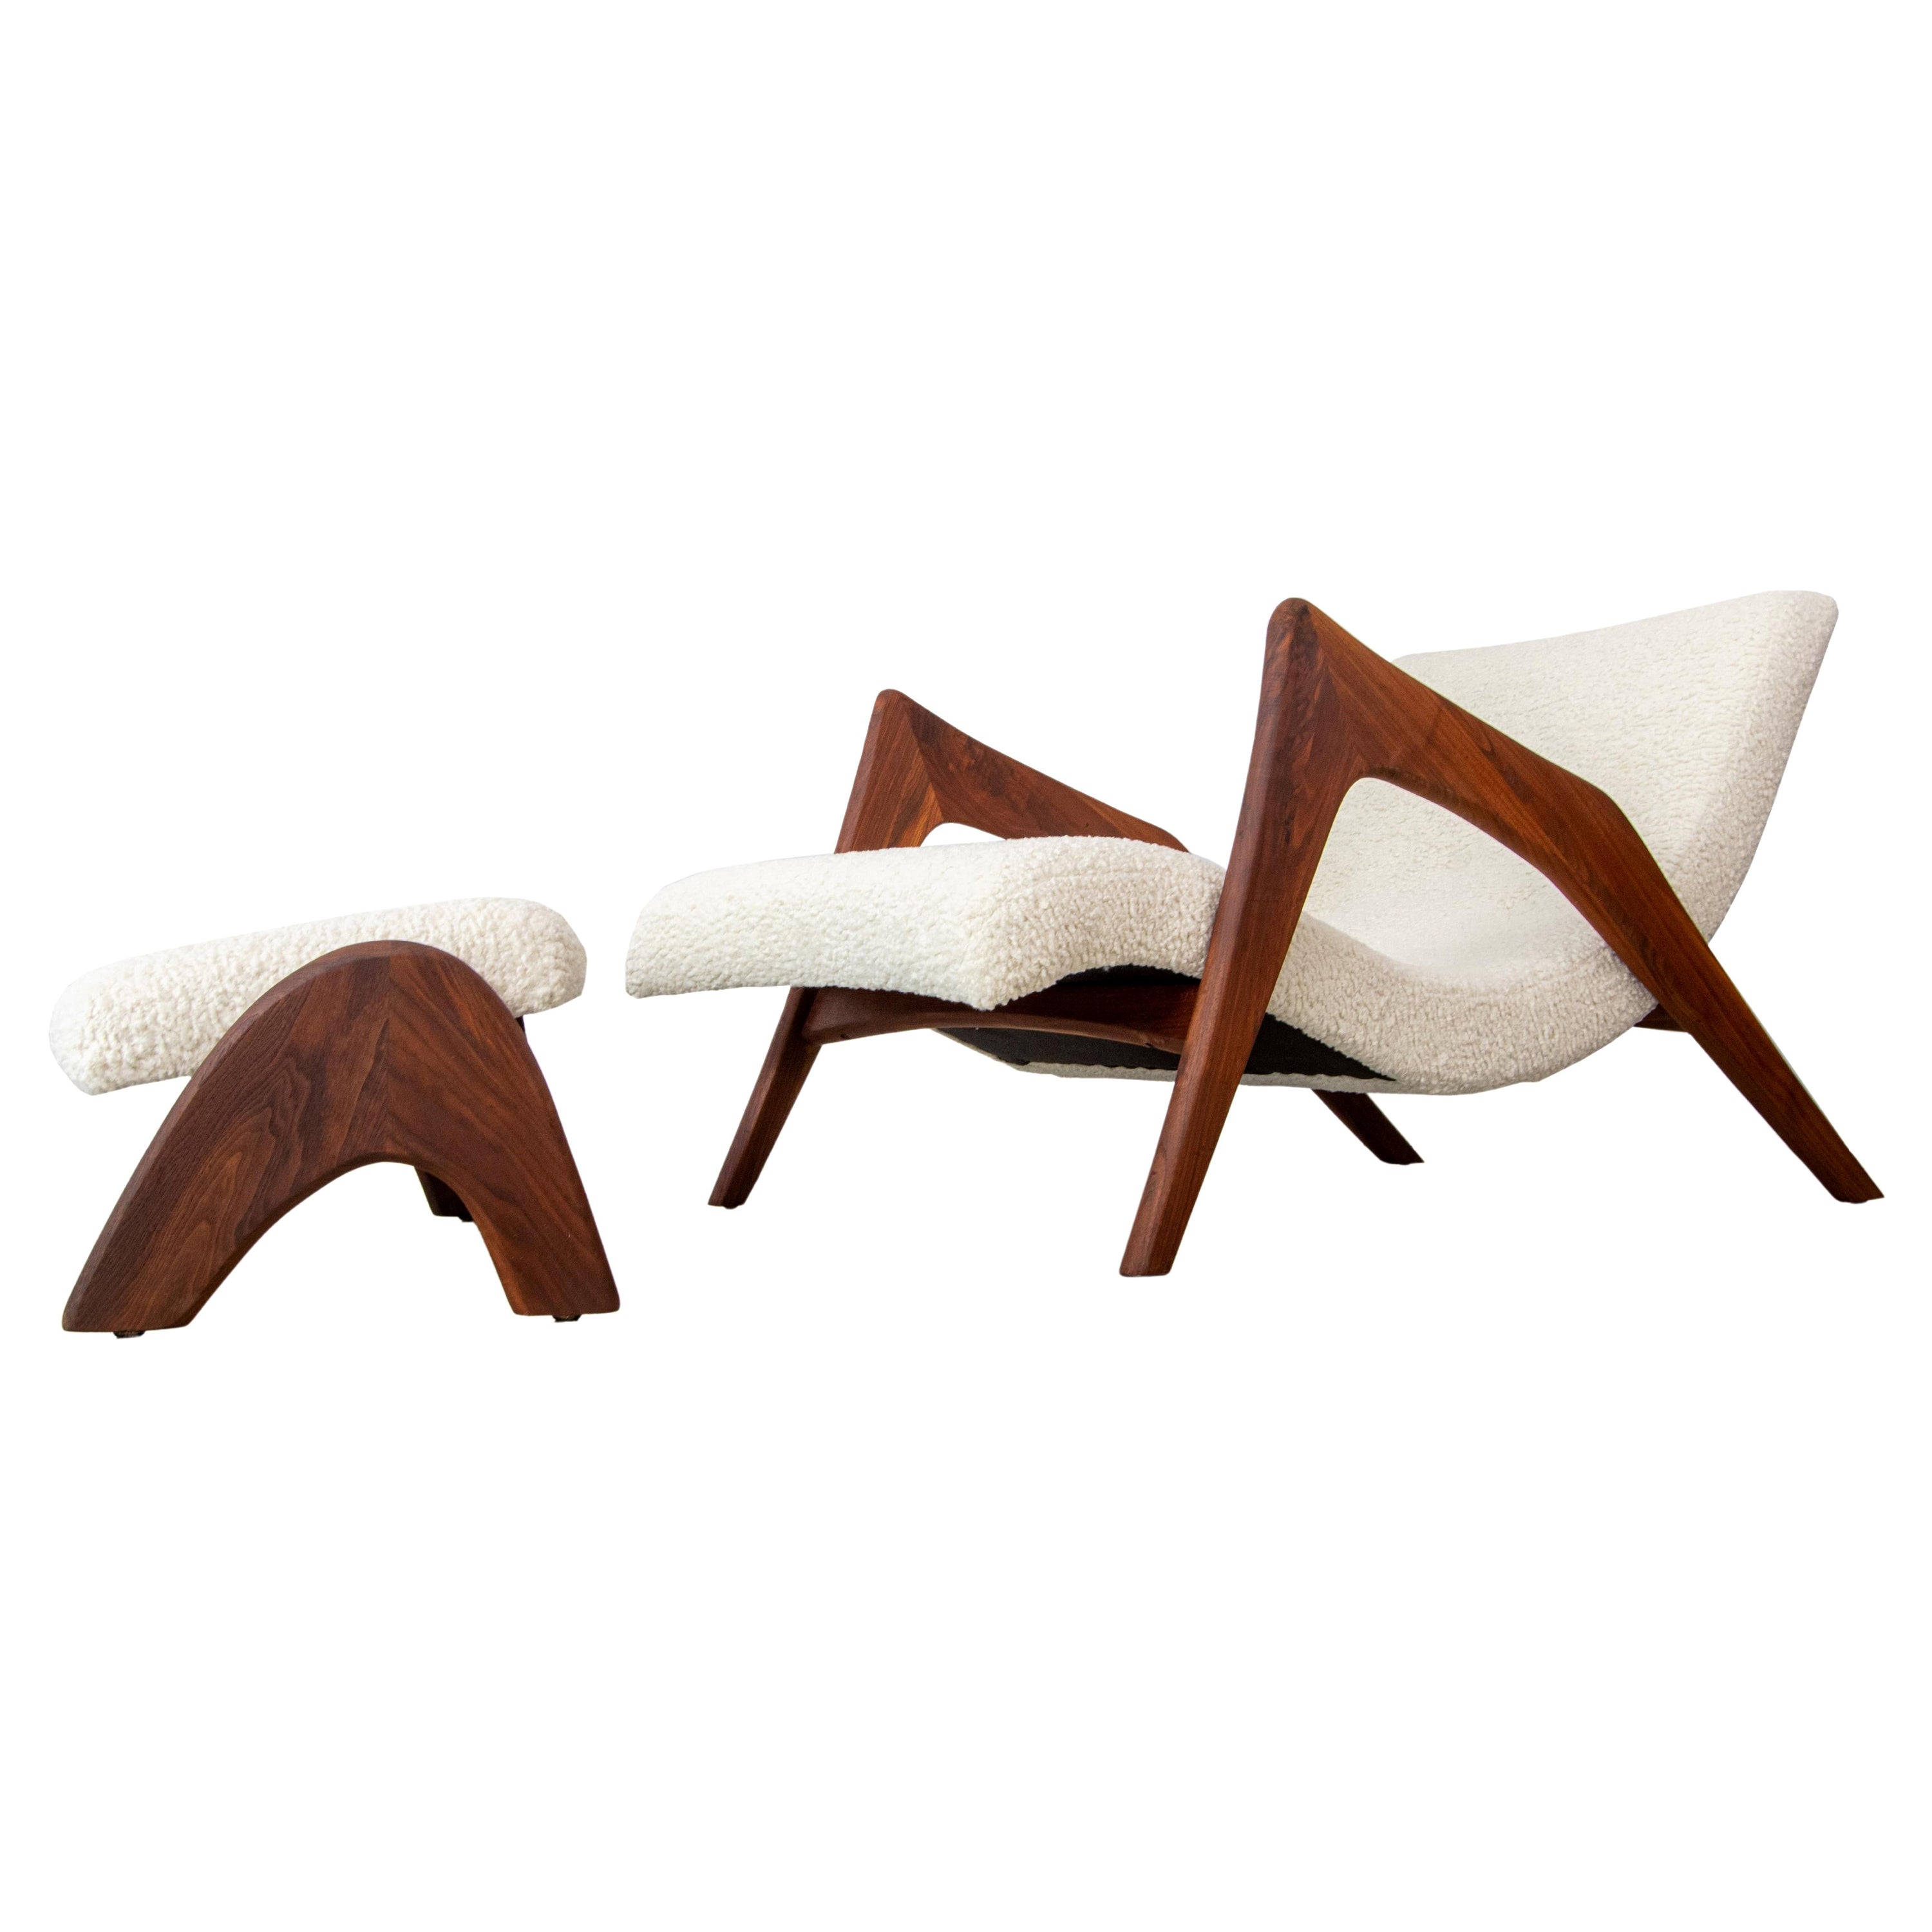 Grasshopper Crescent Lounge Chair by Adrian Pearsall for Craft Associates